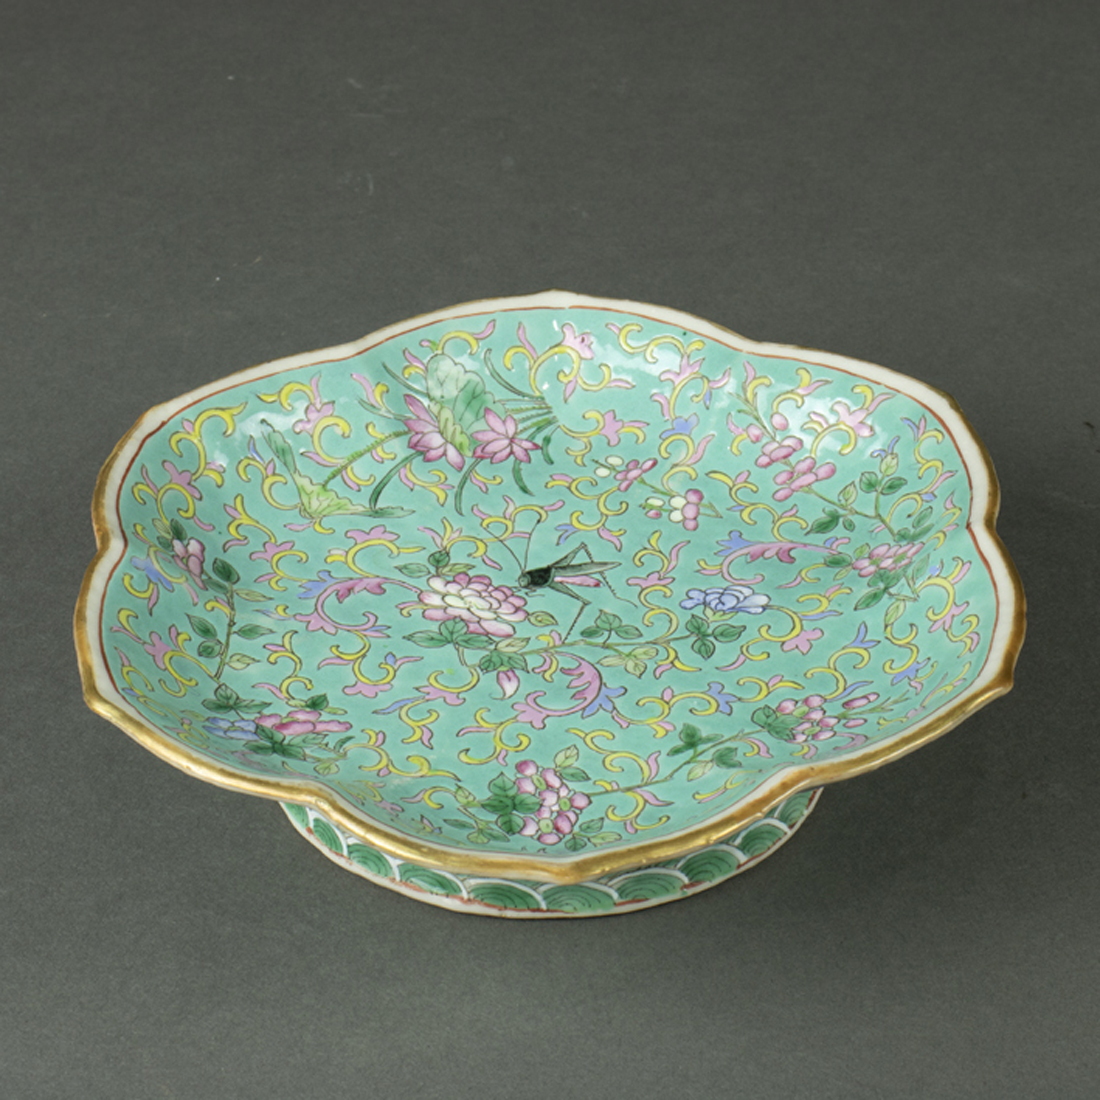 CHINESE FOOTED PORCELAIN BOWL OF 3cdf21